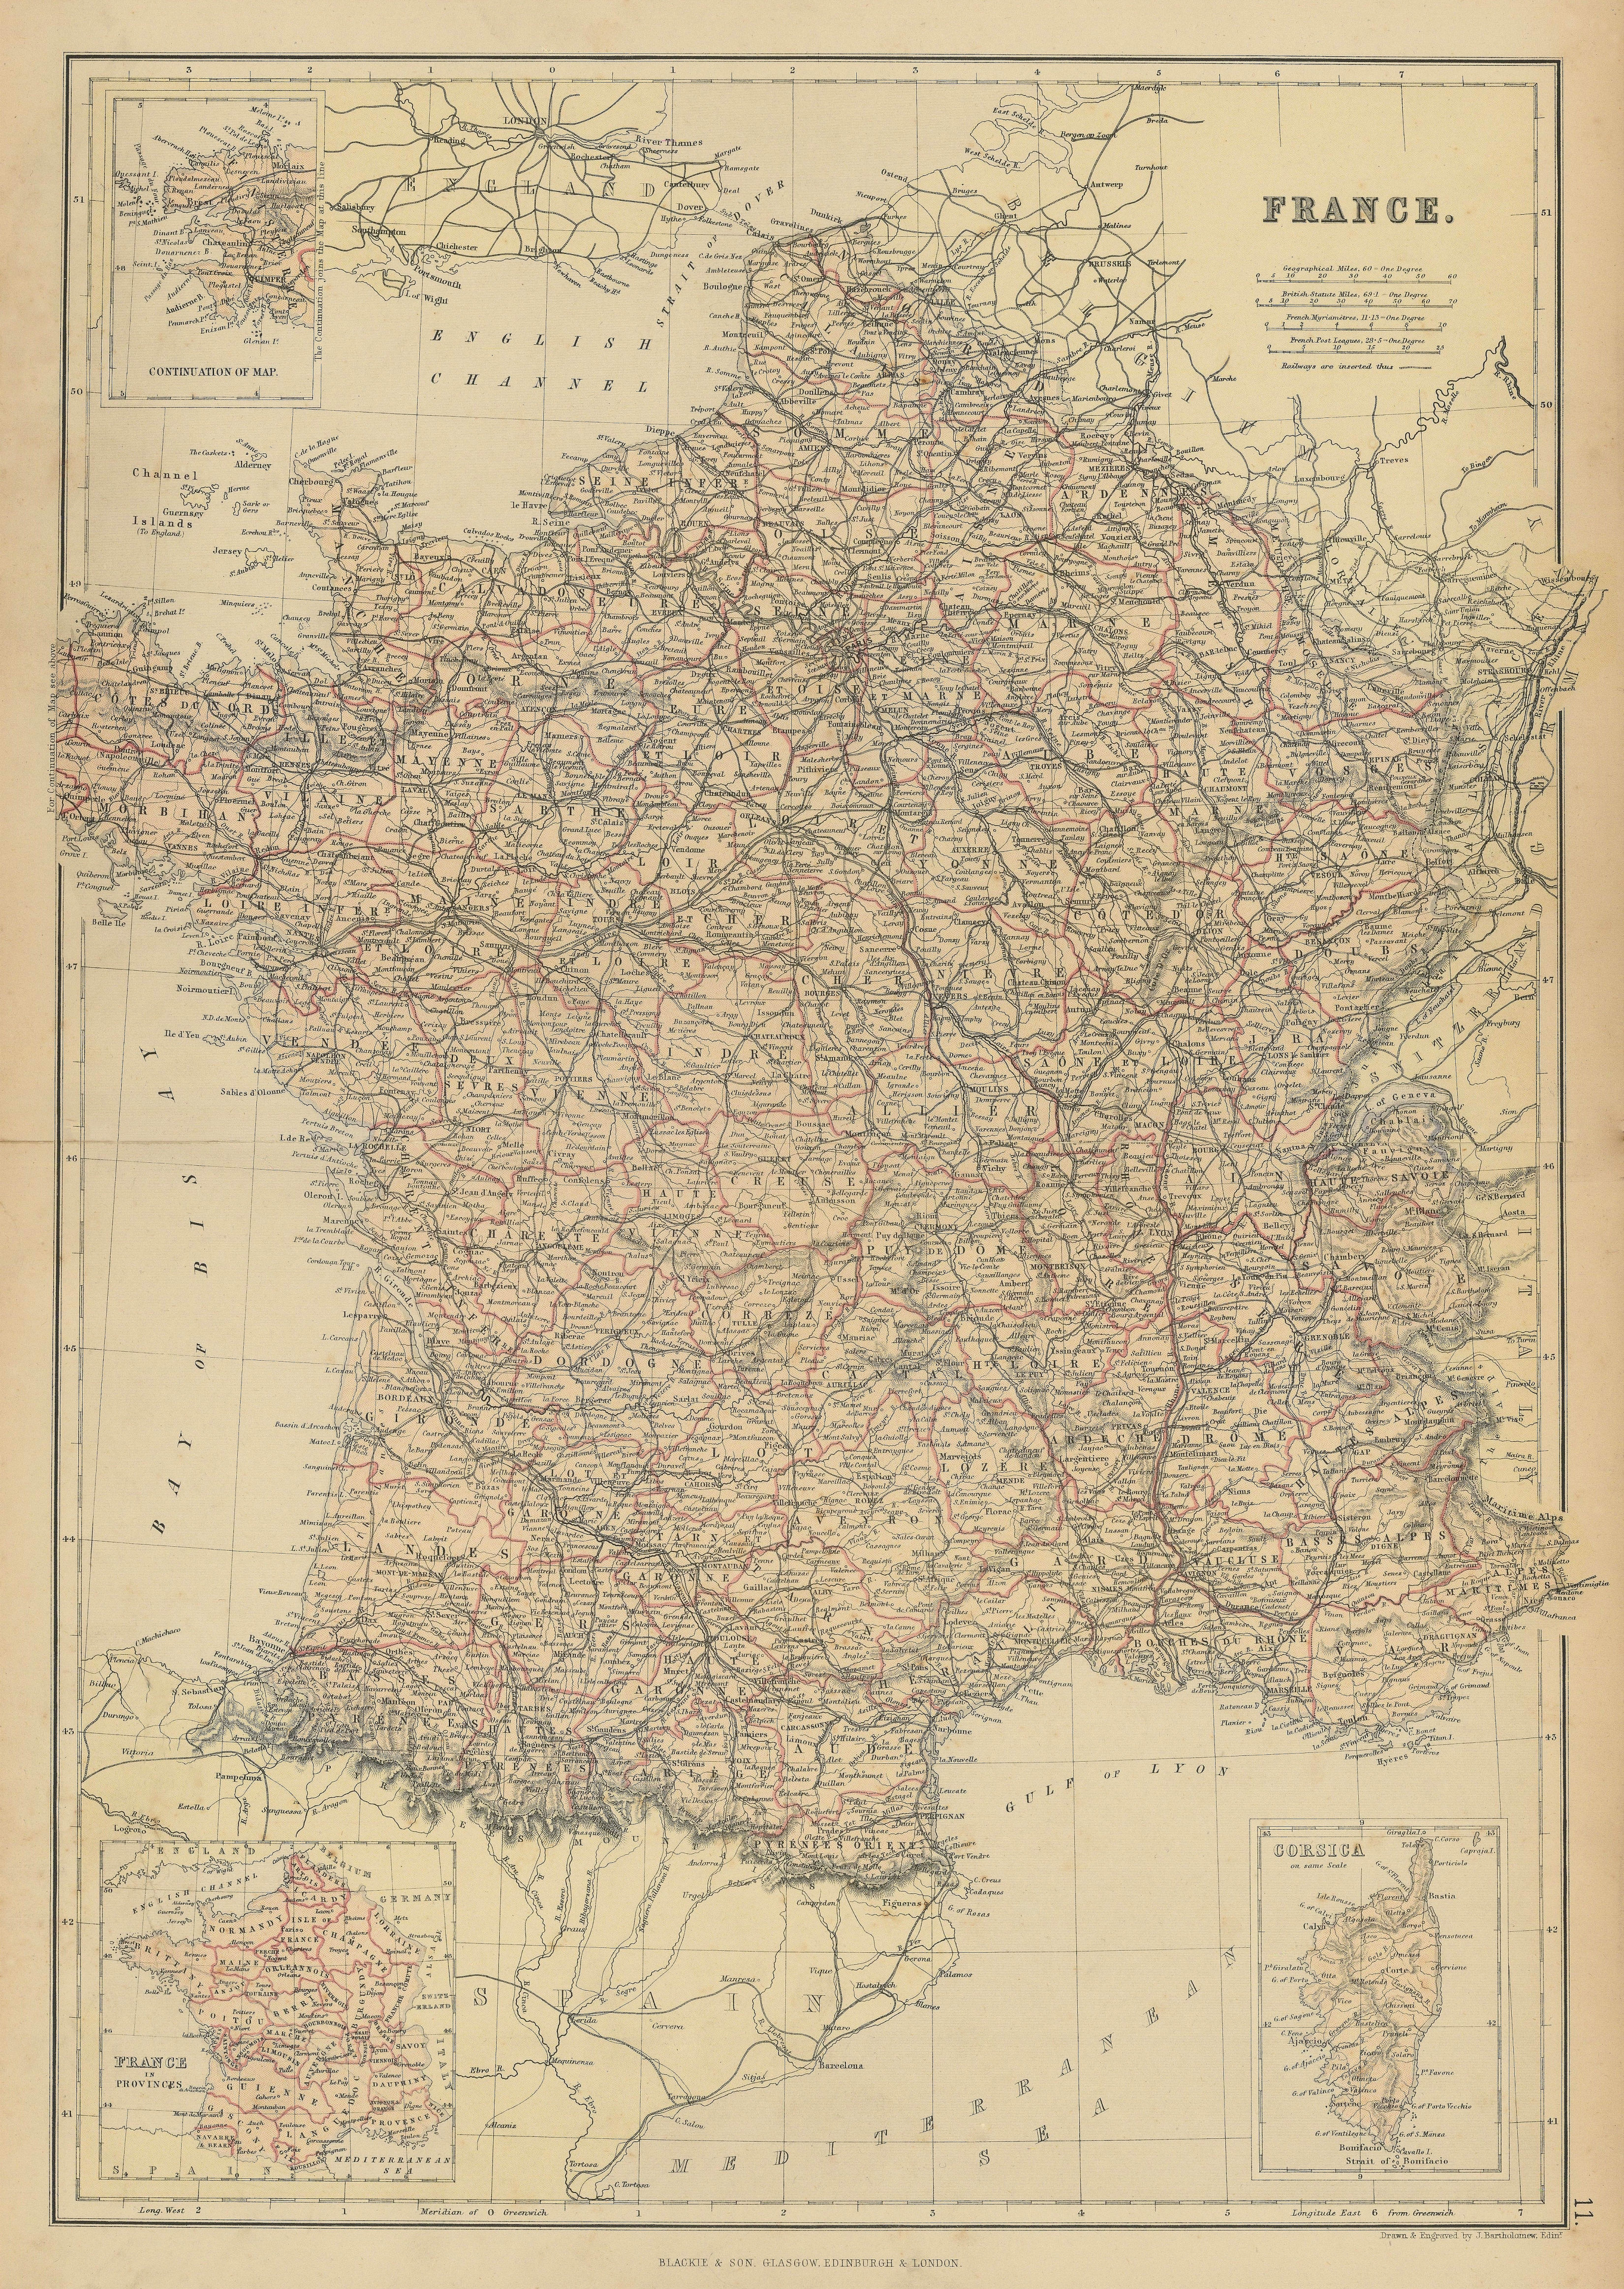 Associate Product FRANCE. Departements. Railways. Inset in Provinces. BLACKIE 1886 old map